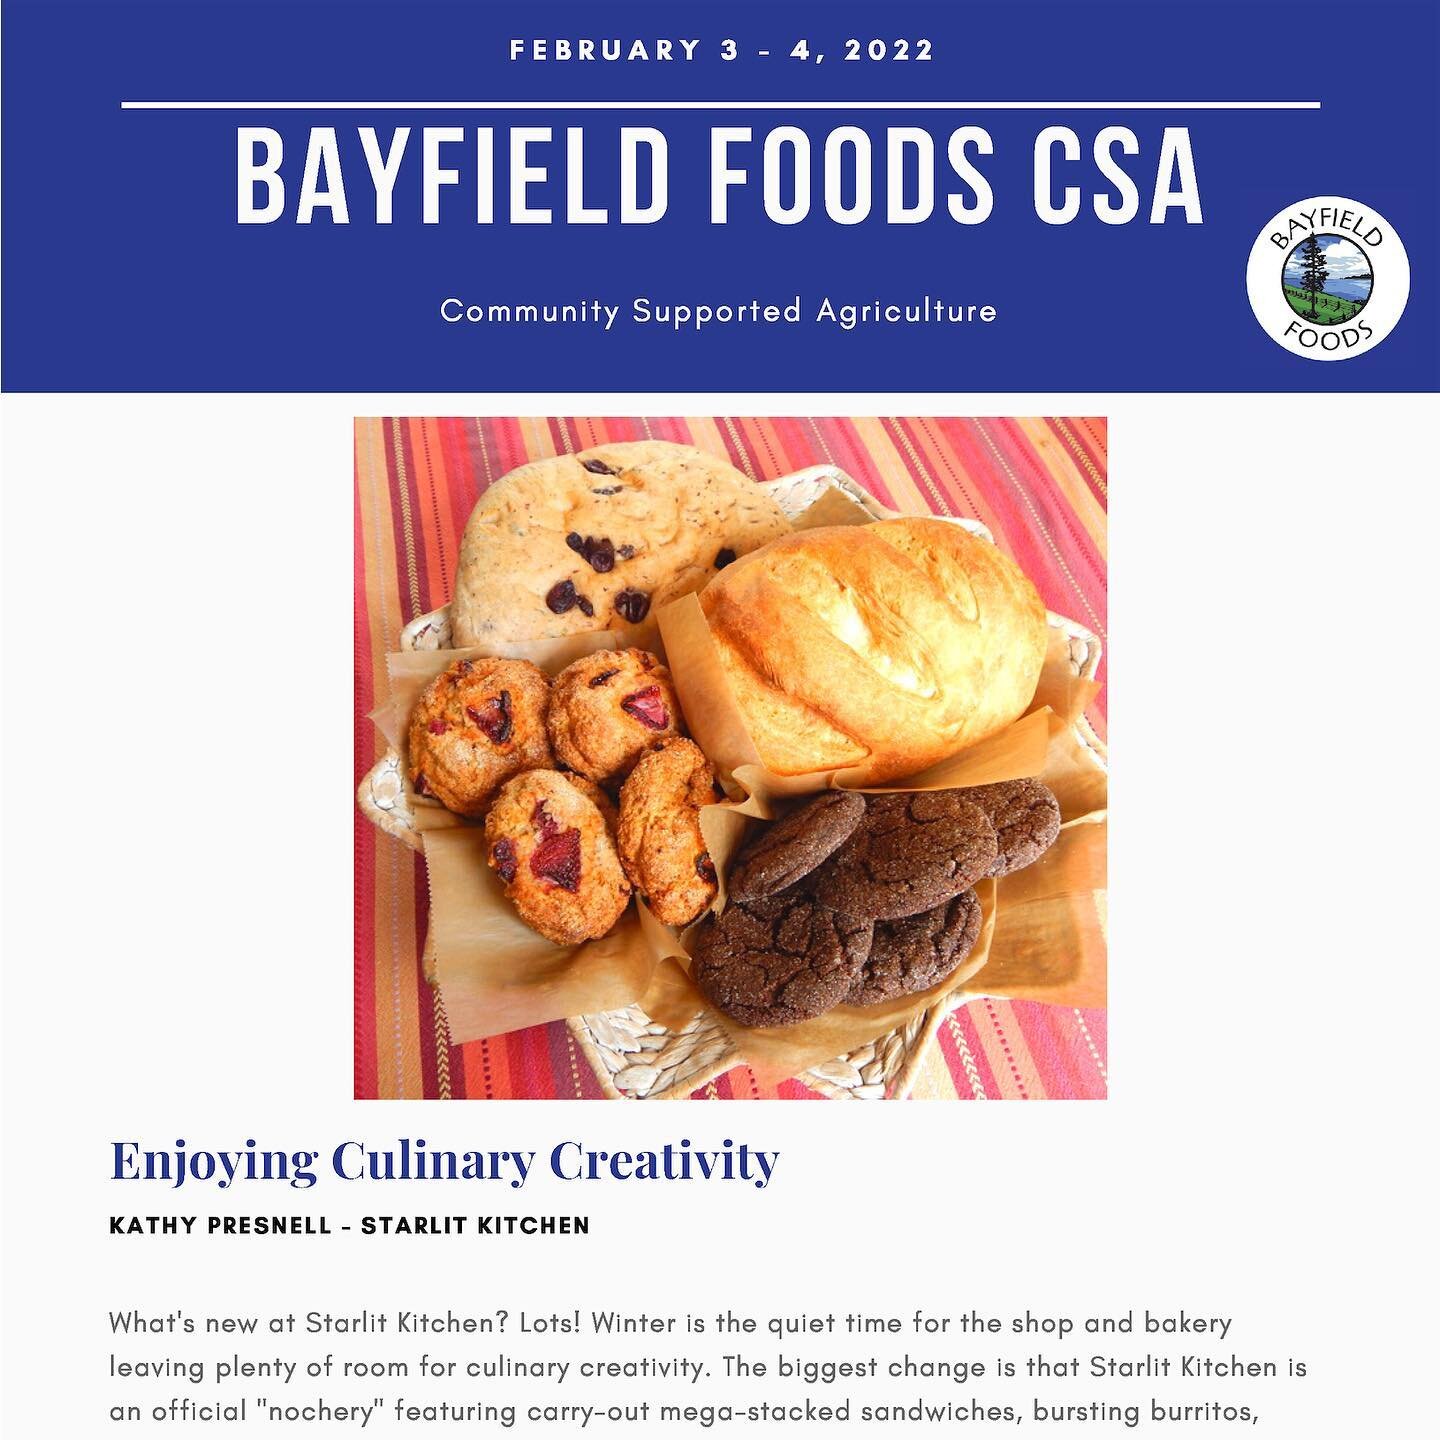 We&rsquo;re featured in Bayfield Foods latest newsletter. Read it on their website!